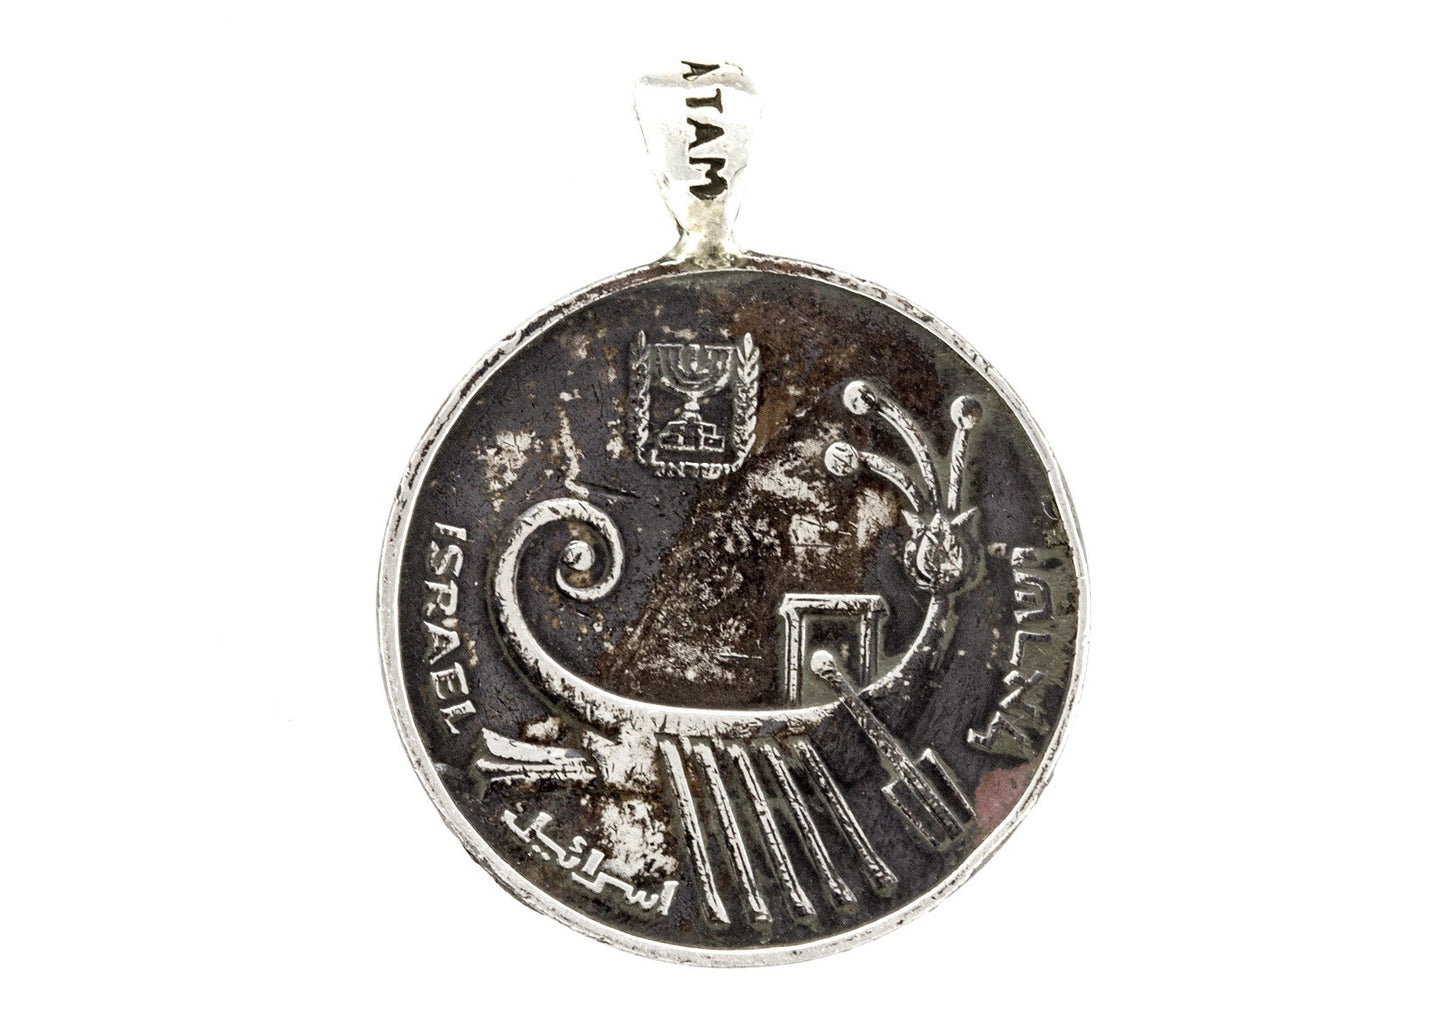 Cancer Zodiac Medallion on an old 10 Sheqel NIS Coin of Israel Necklace